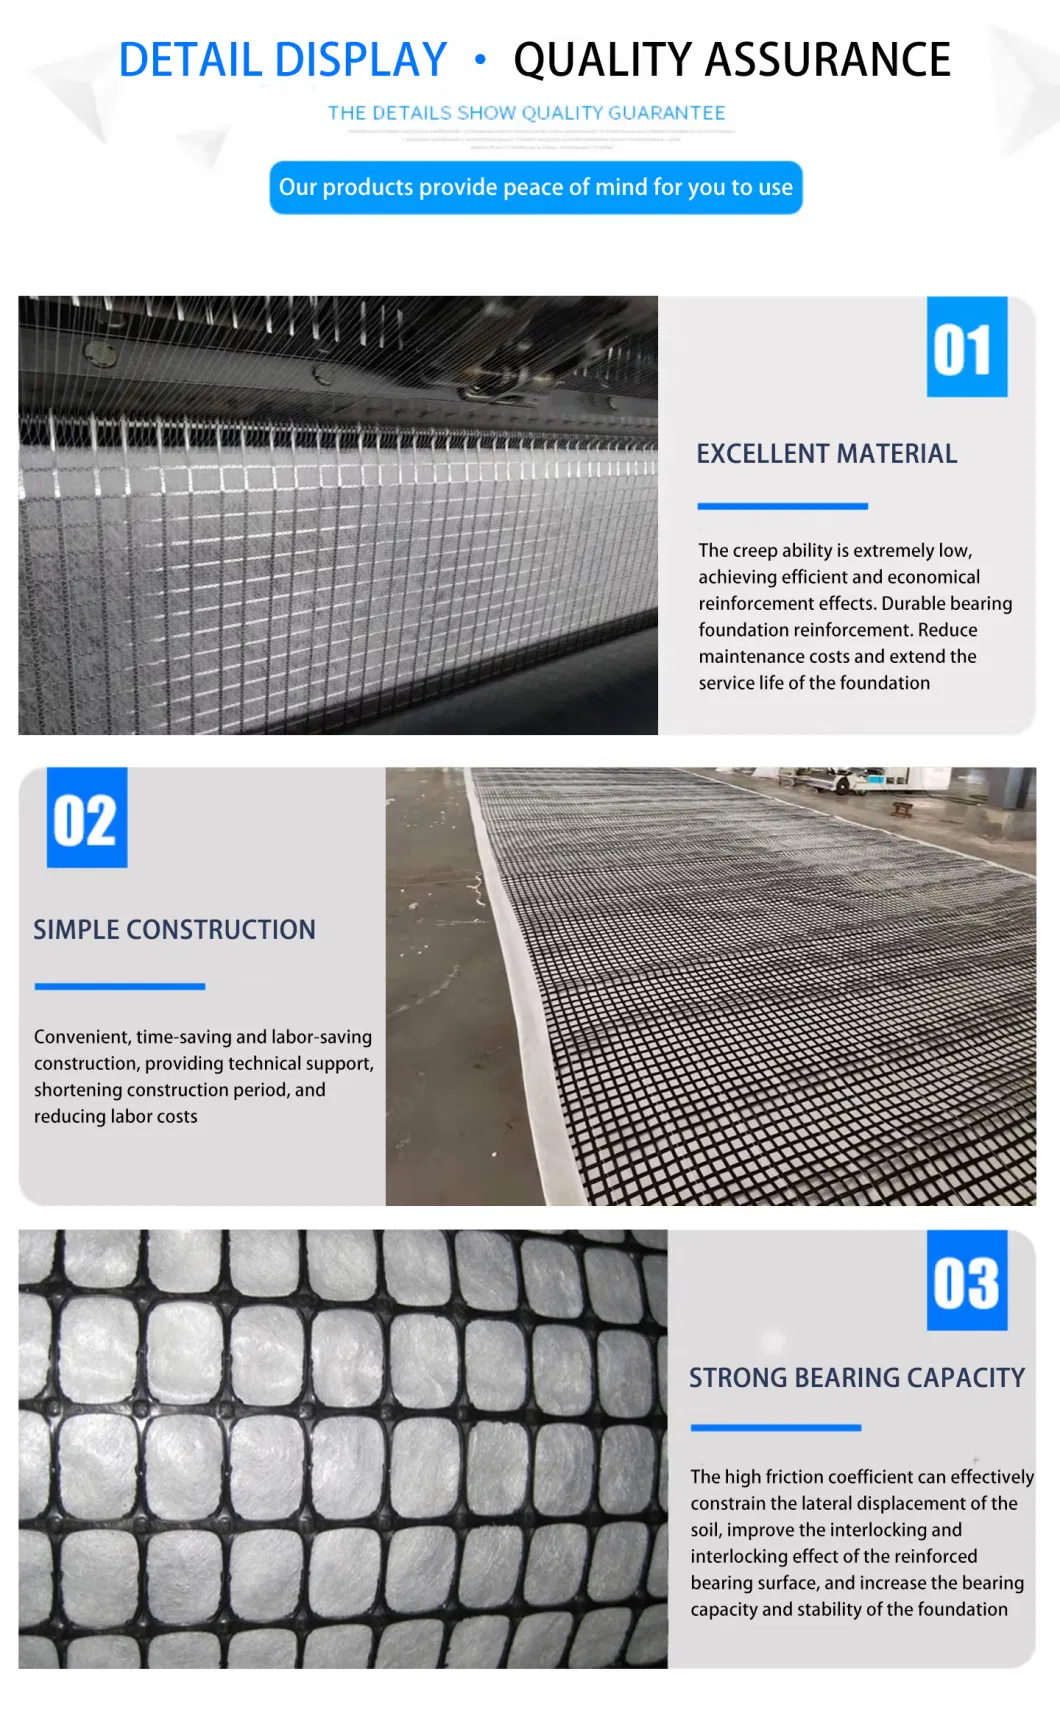 50/50kn Combigrid Biaxial Geogrid Composite with 150g Non Woven Geotextile Global Hot Sale